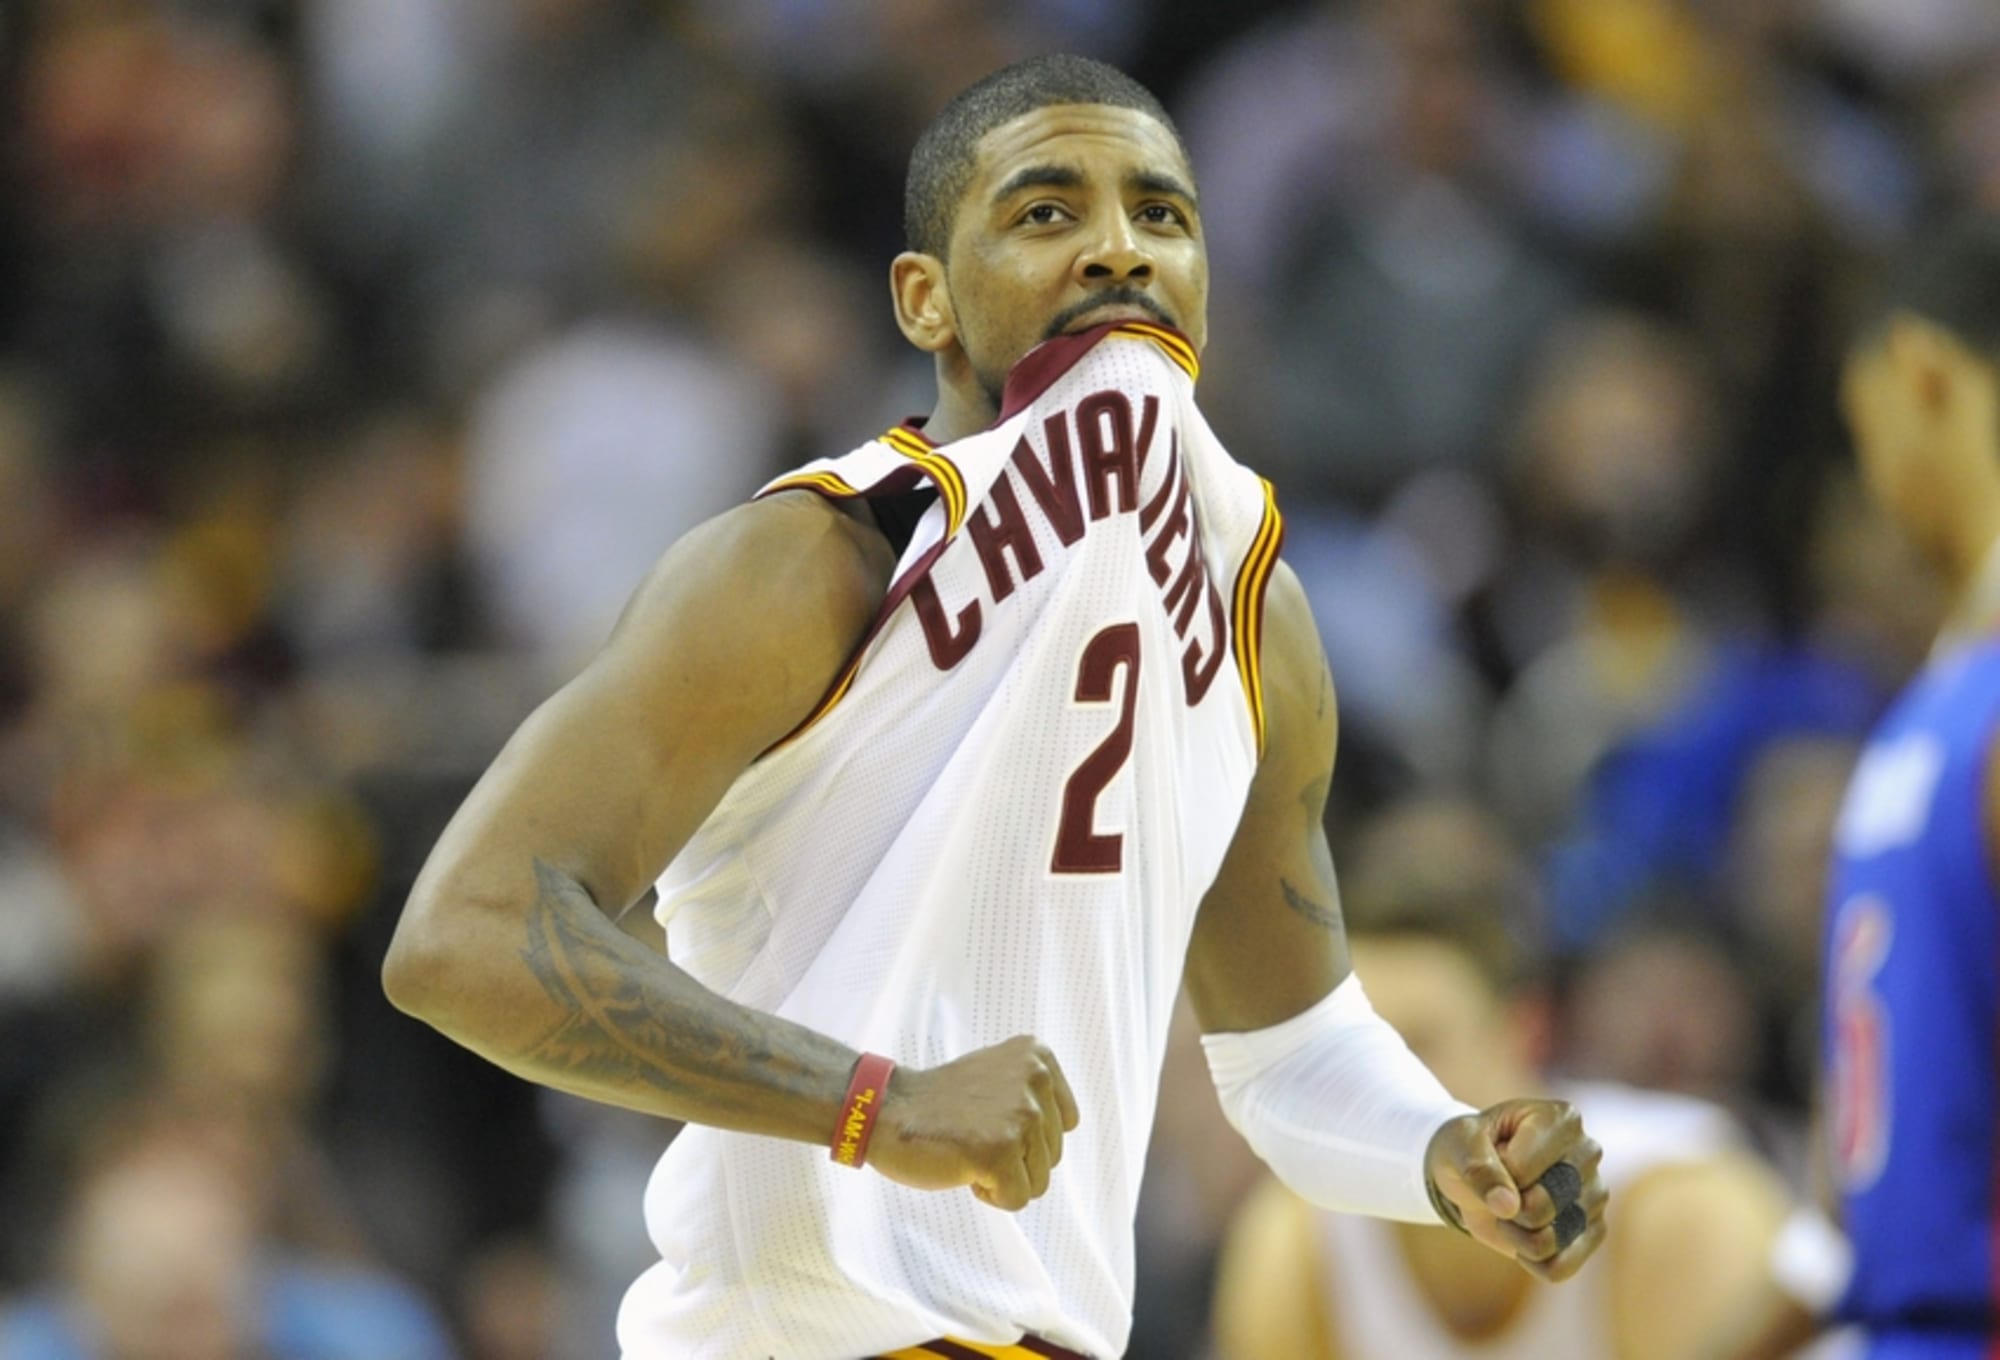 Cleveland Cavaliers focus on closing out Detroit Pistons